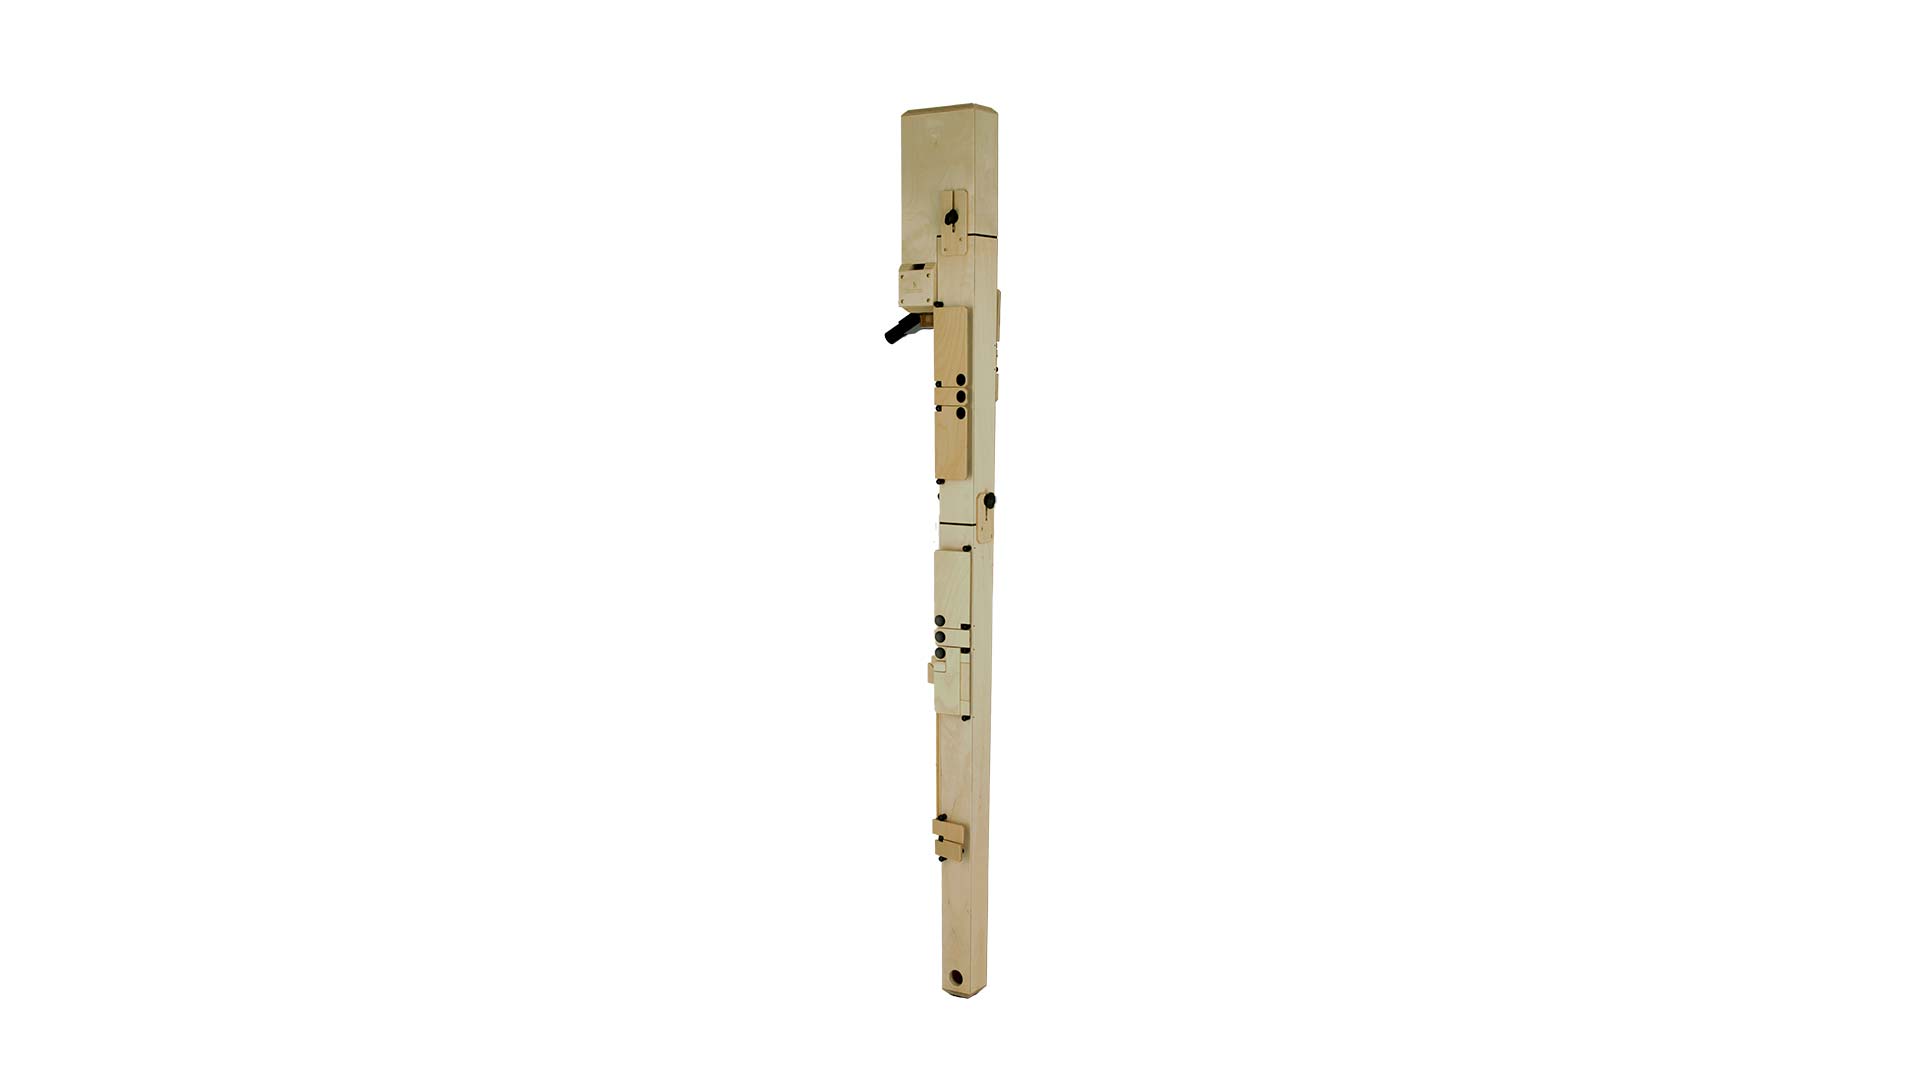 Paetzold by Kunath, contra bass in F, "Master", "HP Original", 442 Hz, natural finish, birch plywood